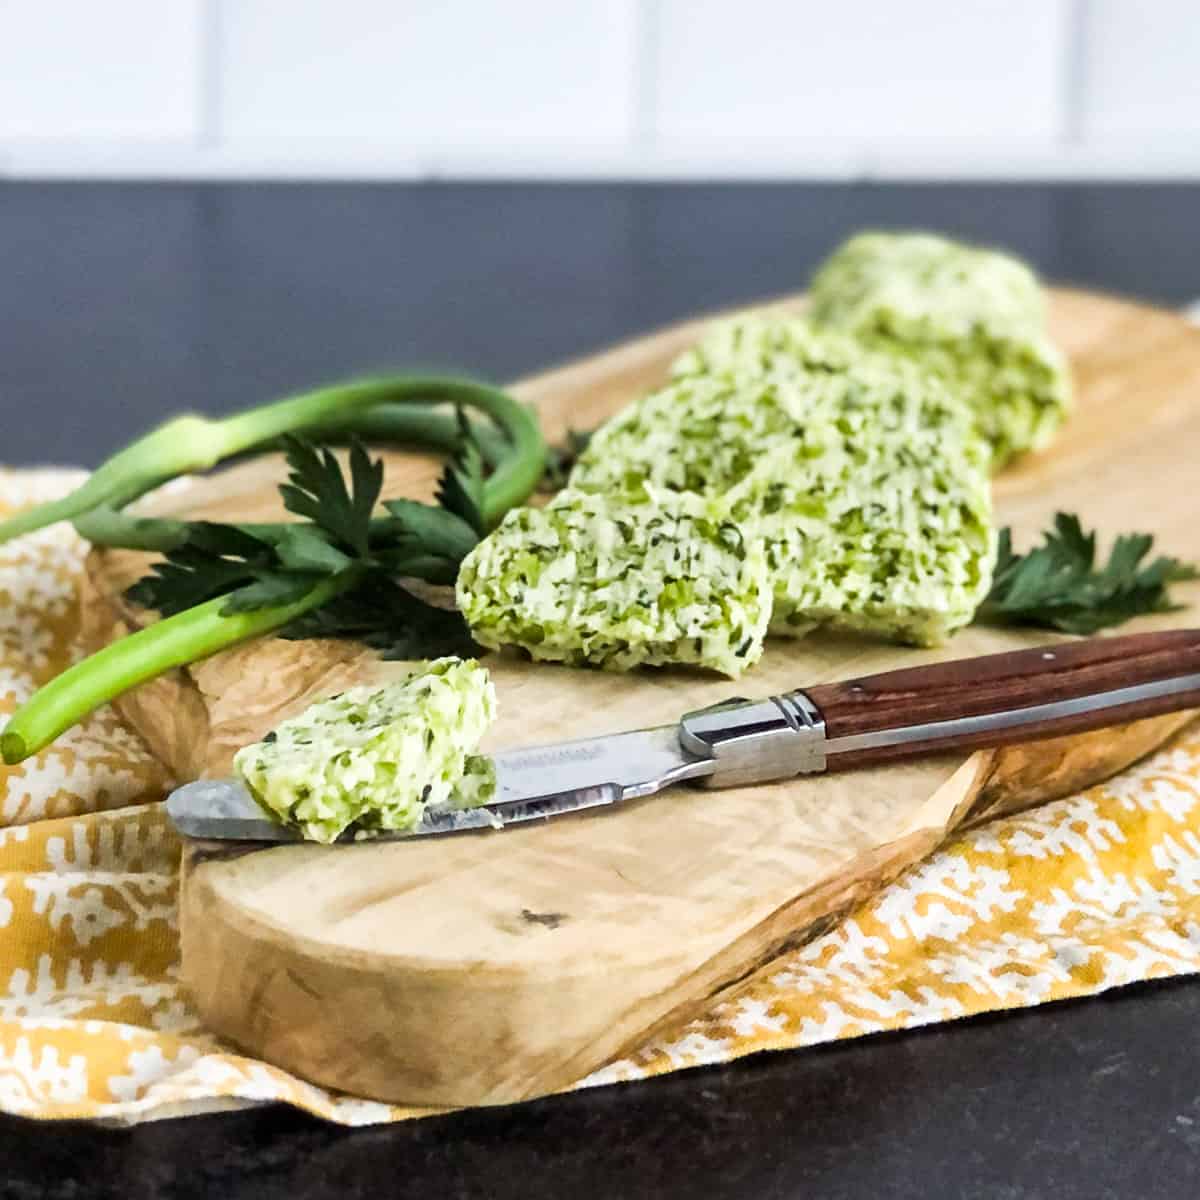 Garlic Scape Butter slice on a knife with additional slices in background.